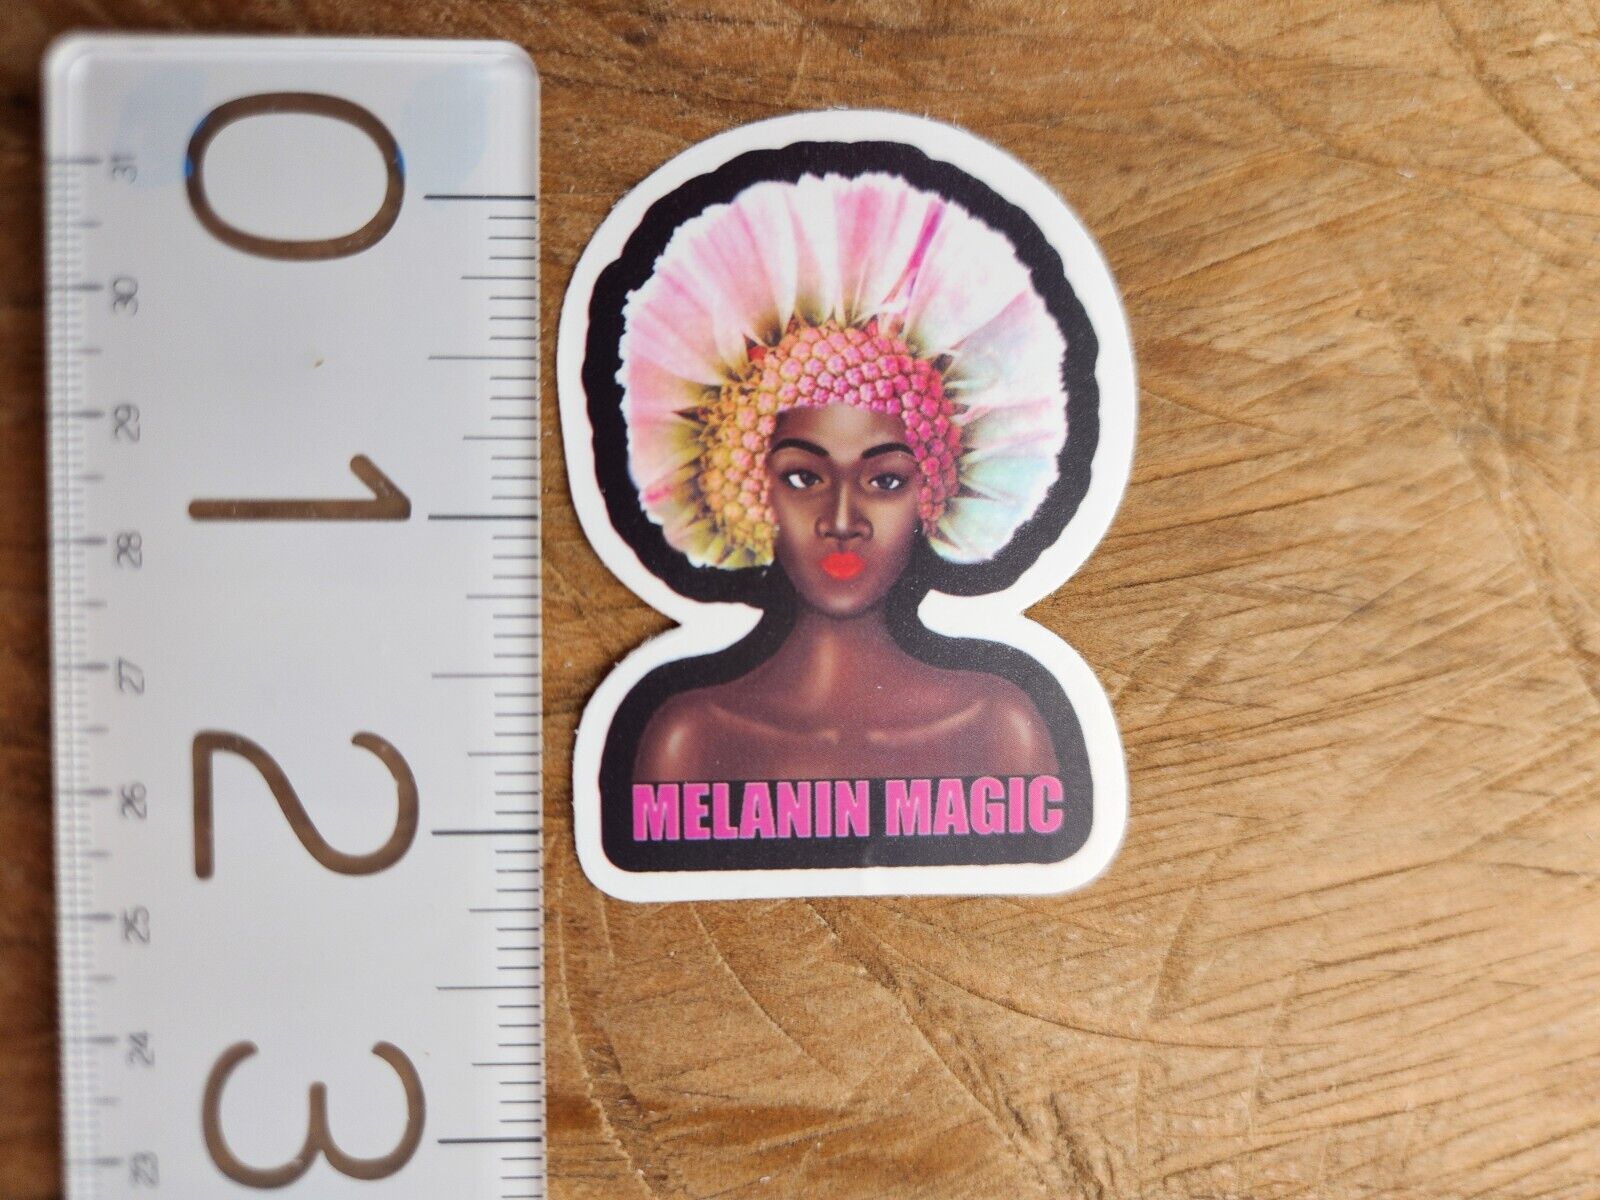 Black Woman Sticker Black Woman Decal African American Woman Strong Black Queen